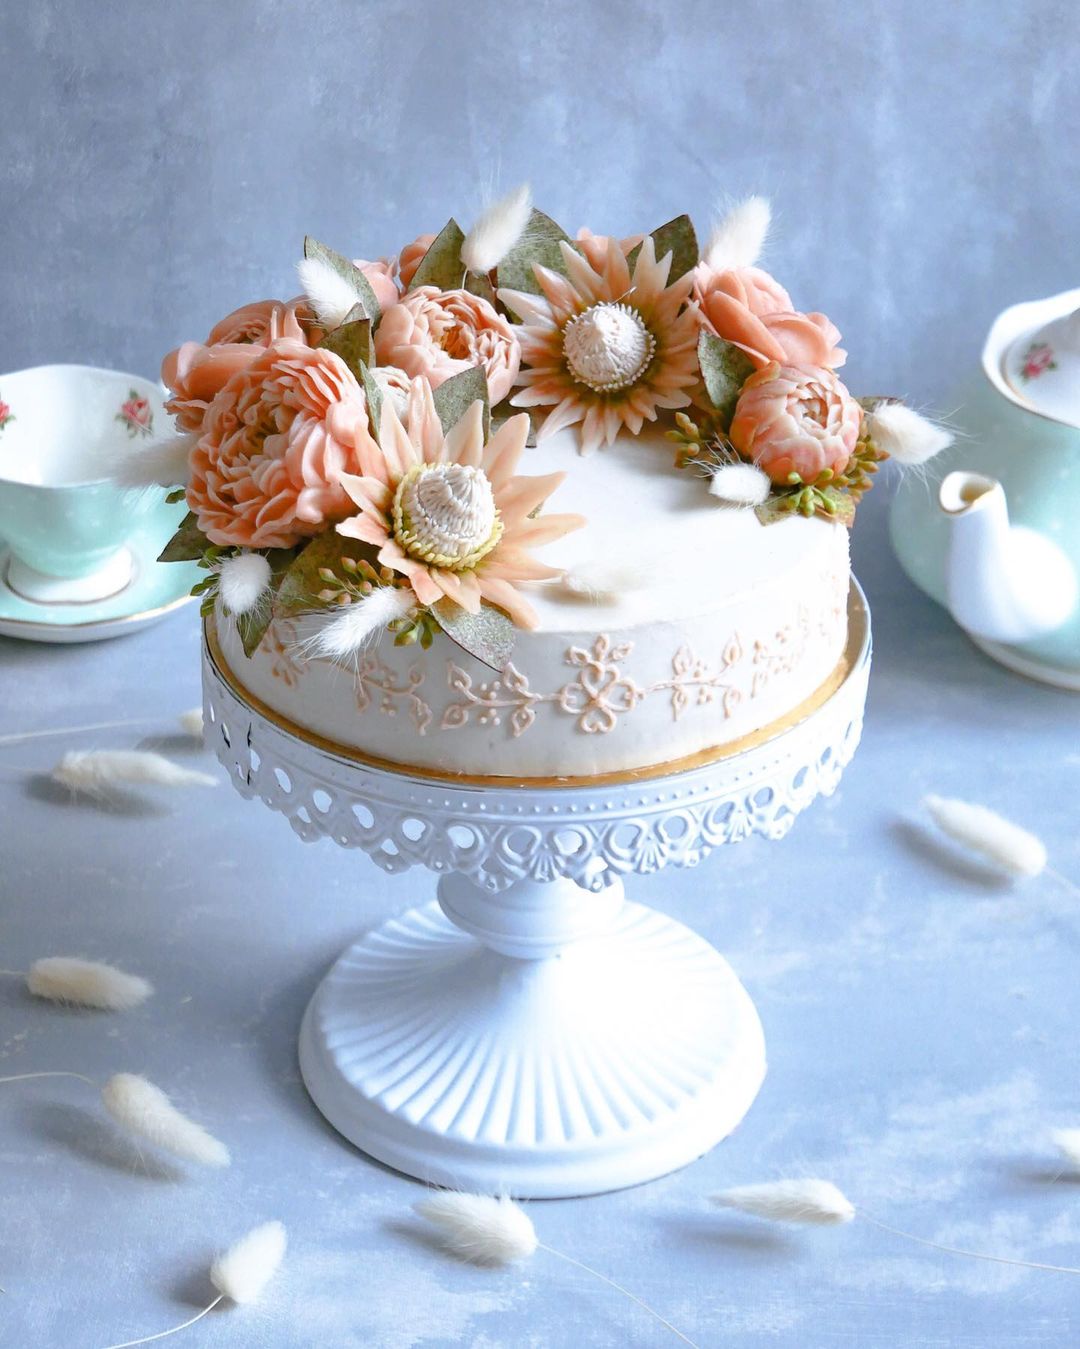 Unique Designs That'll Give You Wedding Cake Inspiration ...